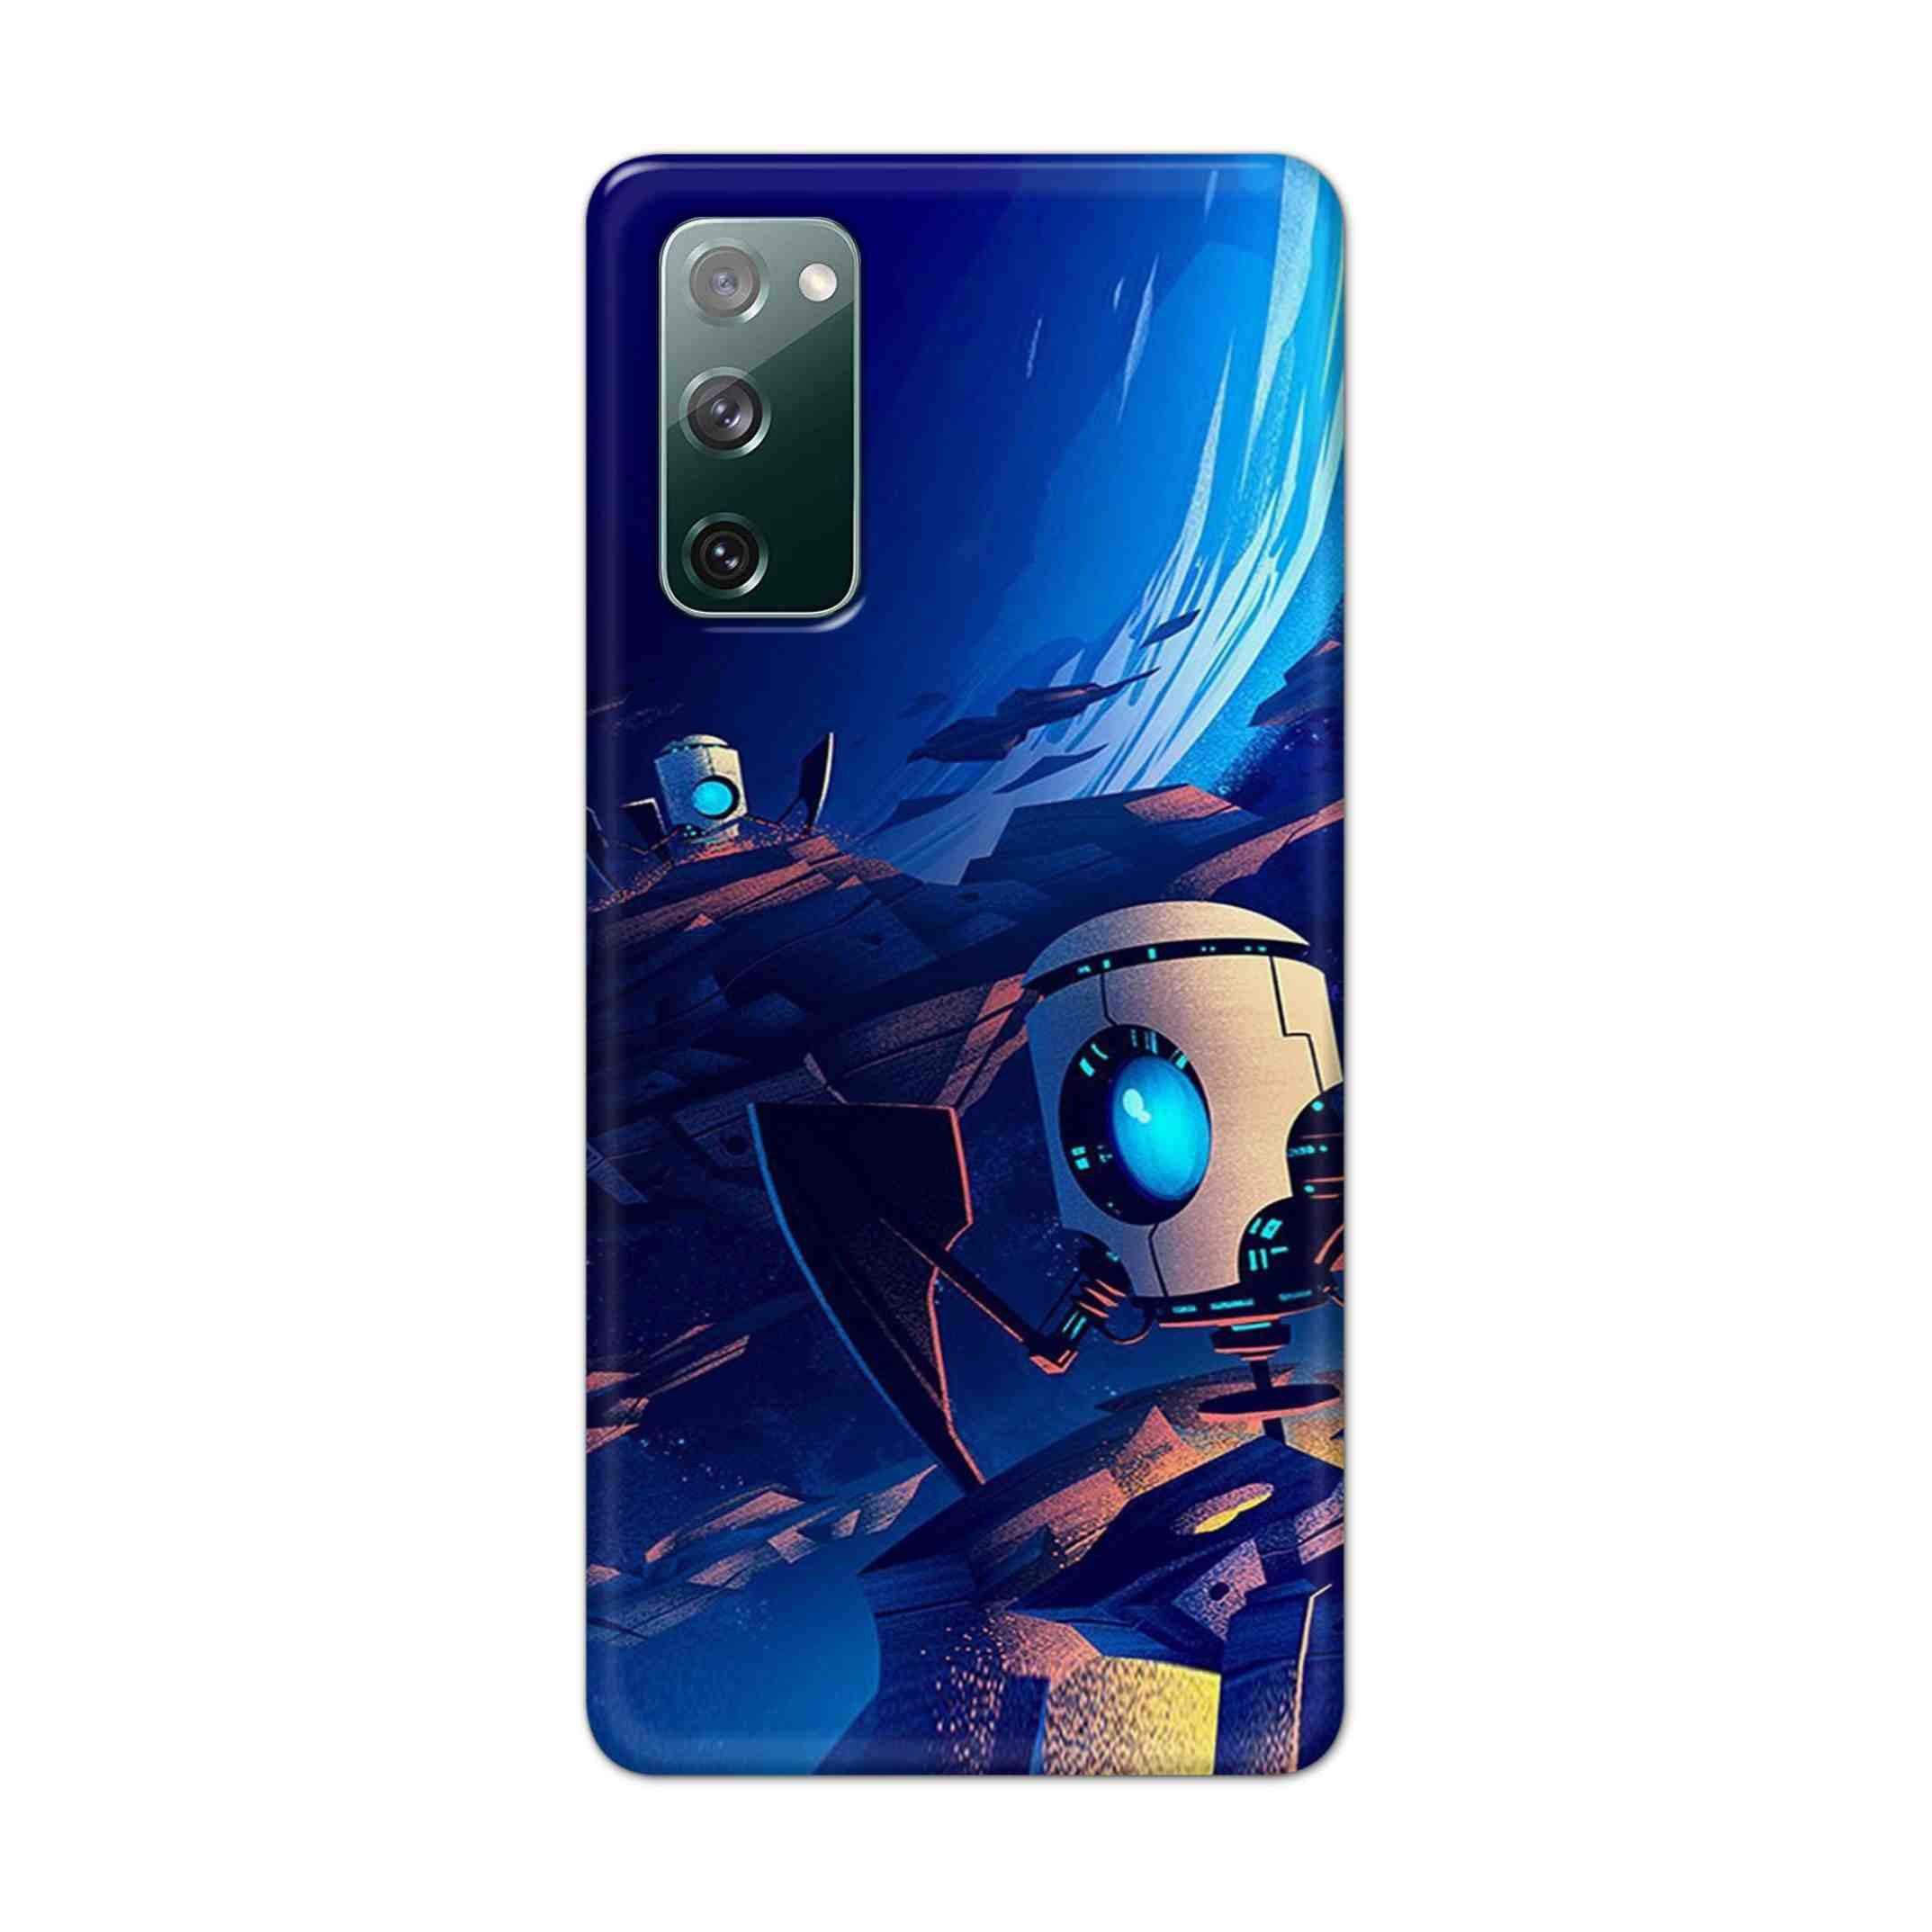 Buy Spaceship Robot Hard Back Mobile Phone Case Cover For Samsung Galaxy S20 FE Online